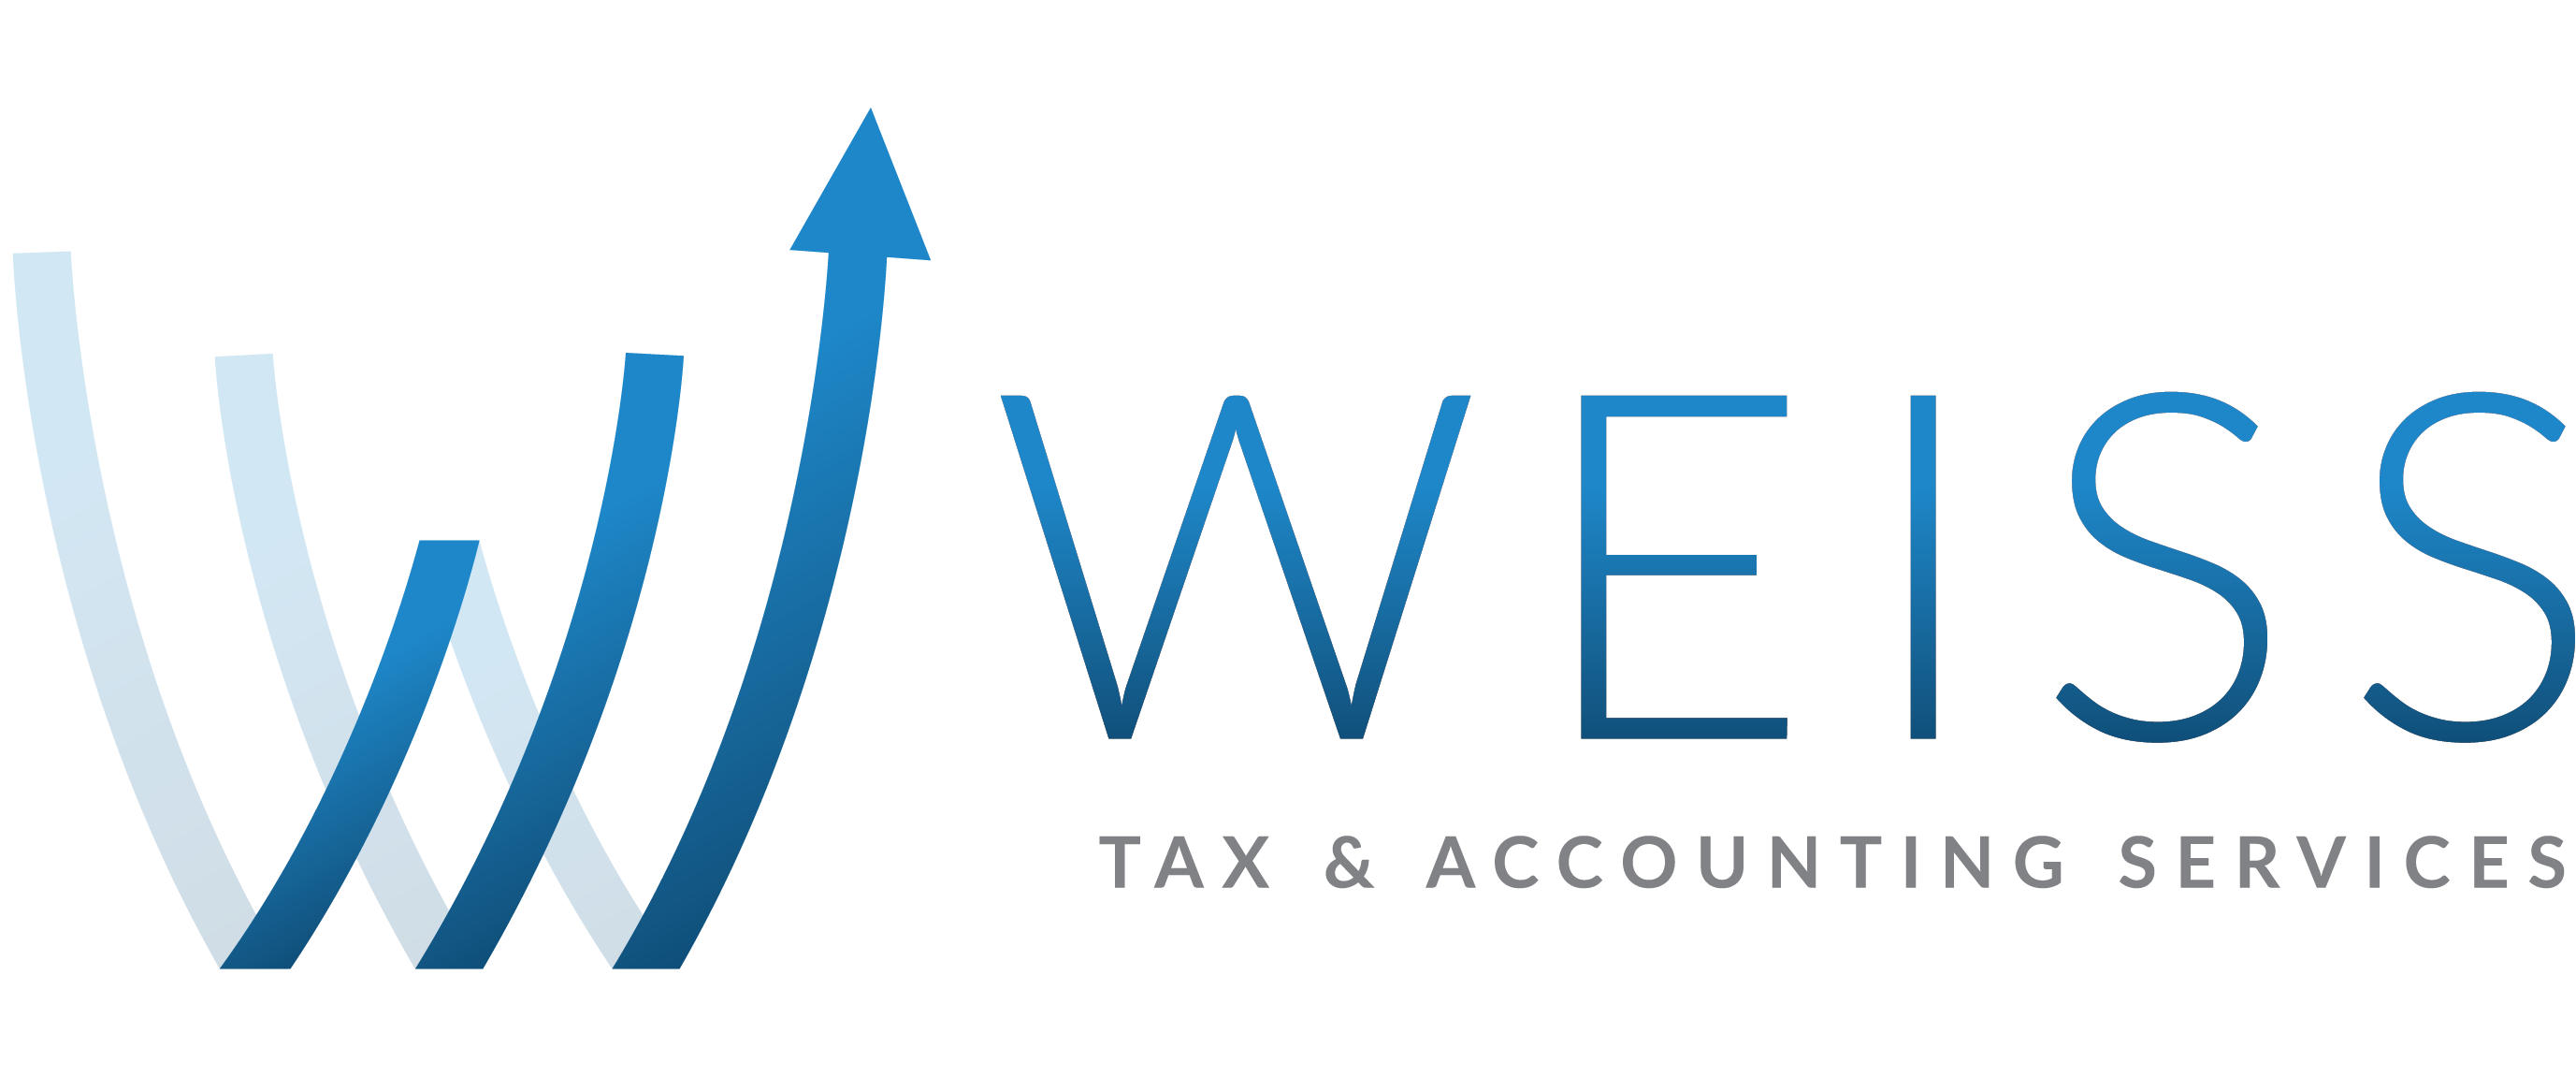 Weiss Tax & Accounting Services